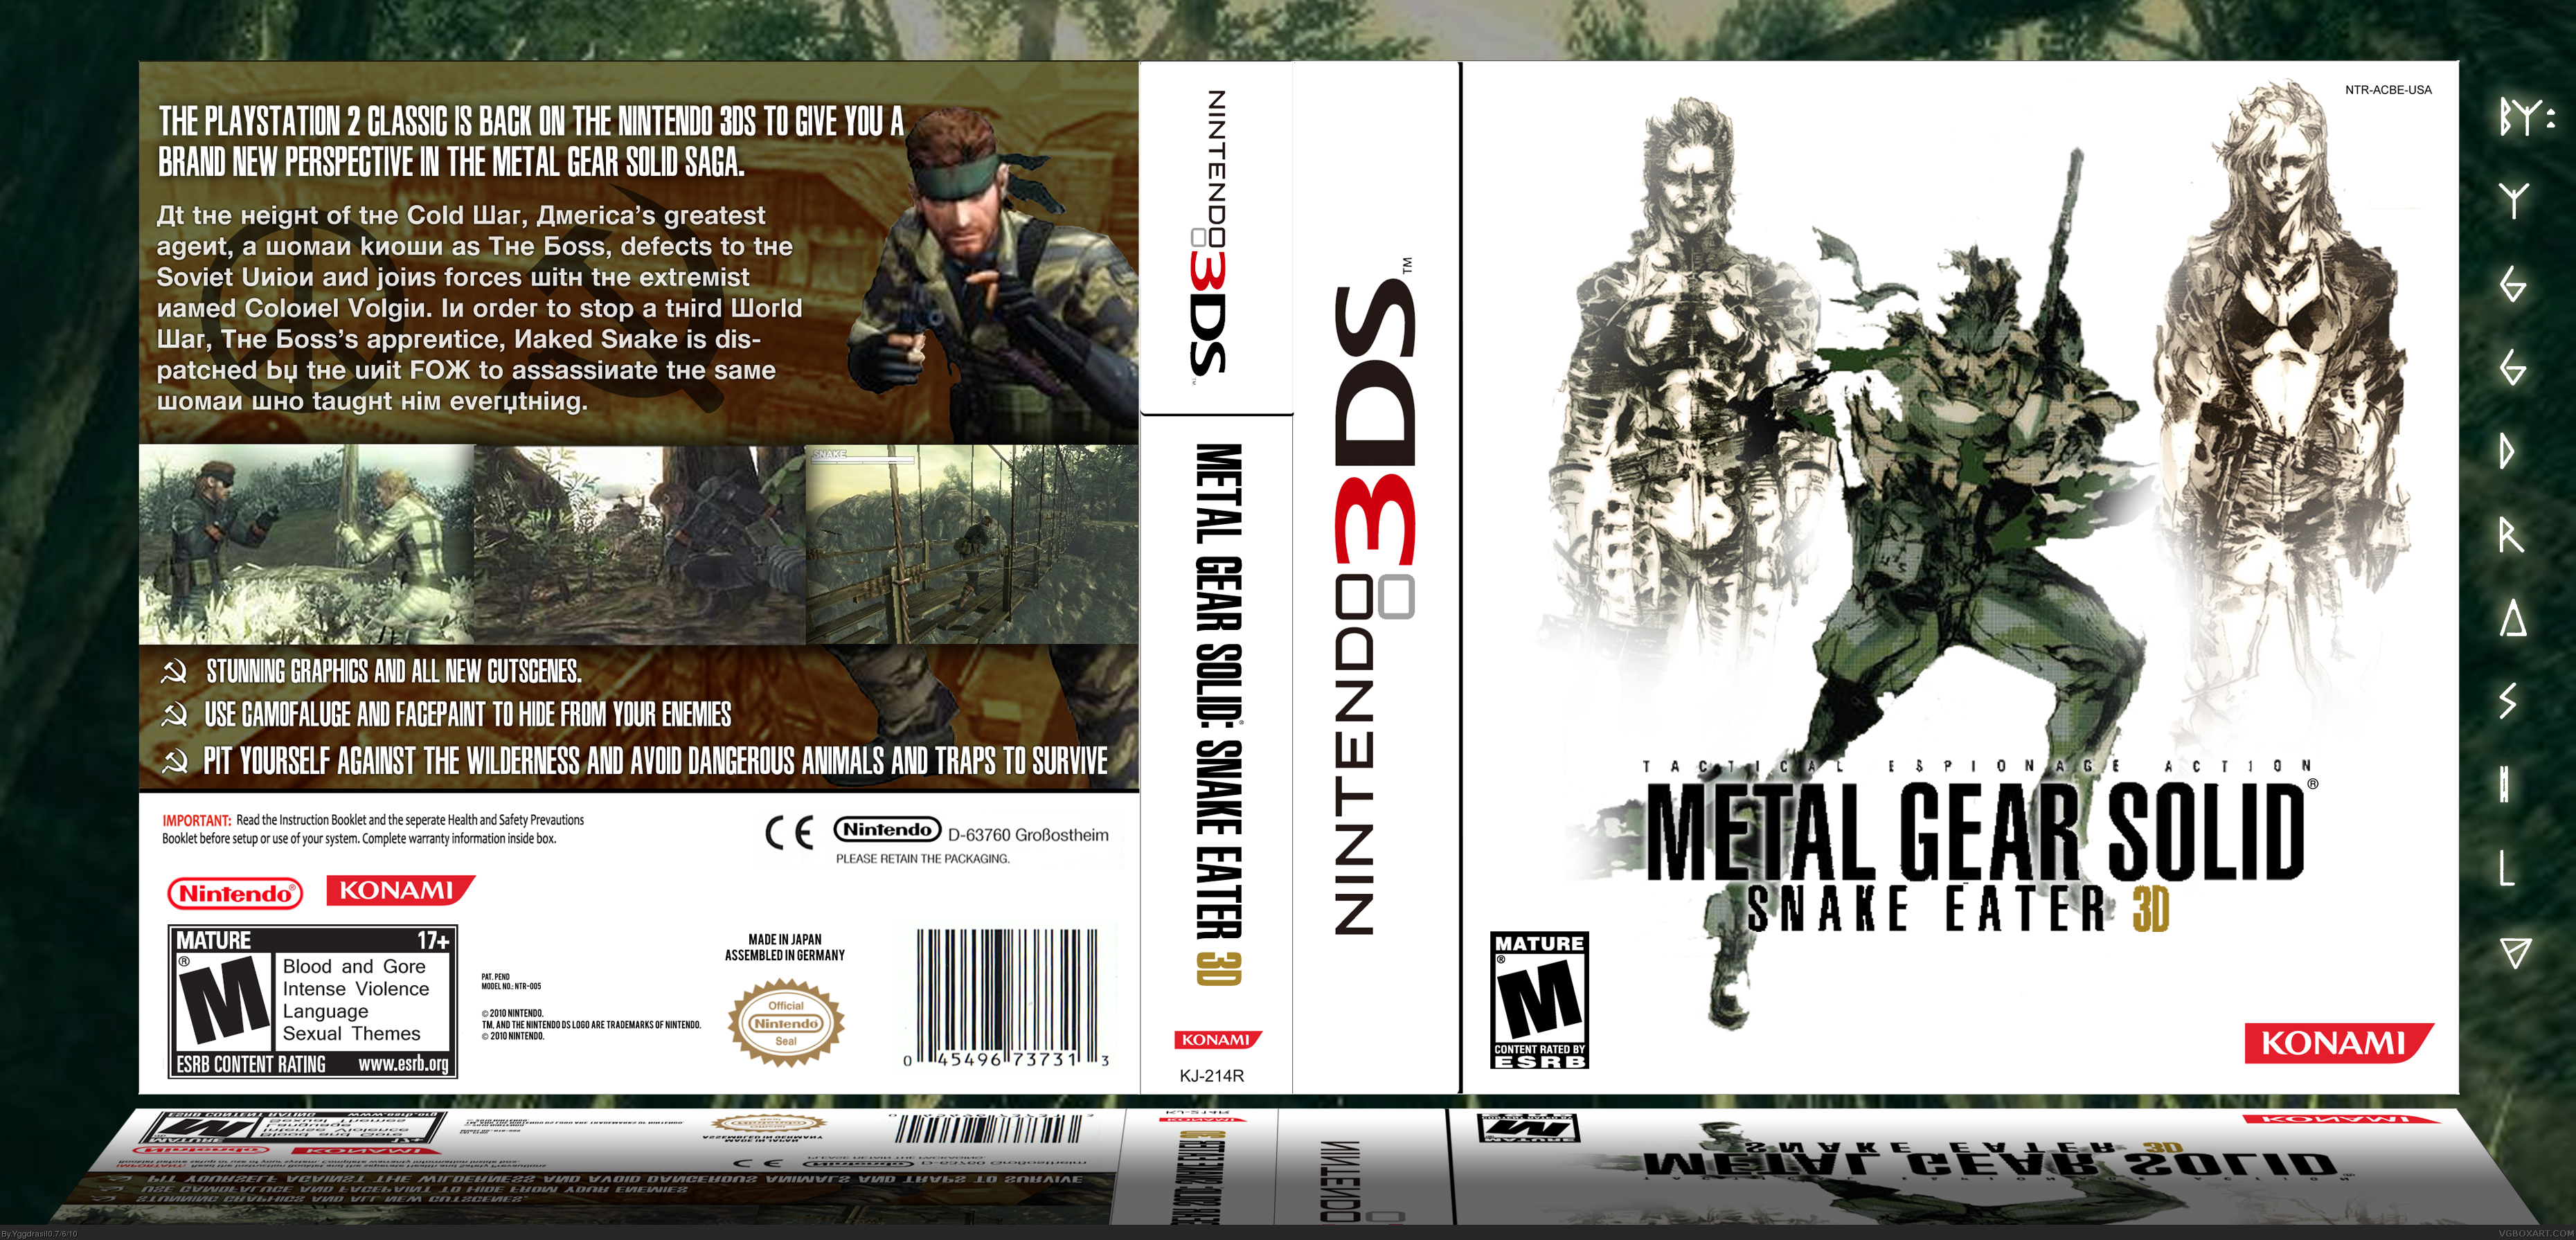 Metal Gear Solid: Snake Eater 3D box cover